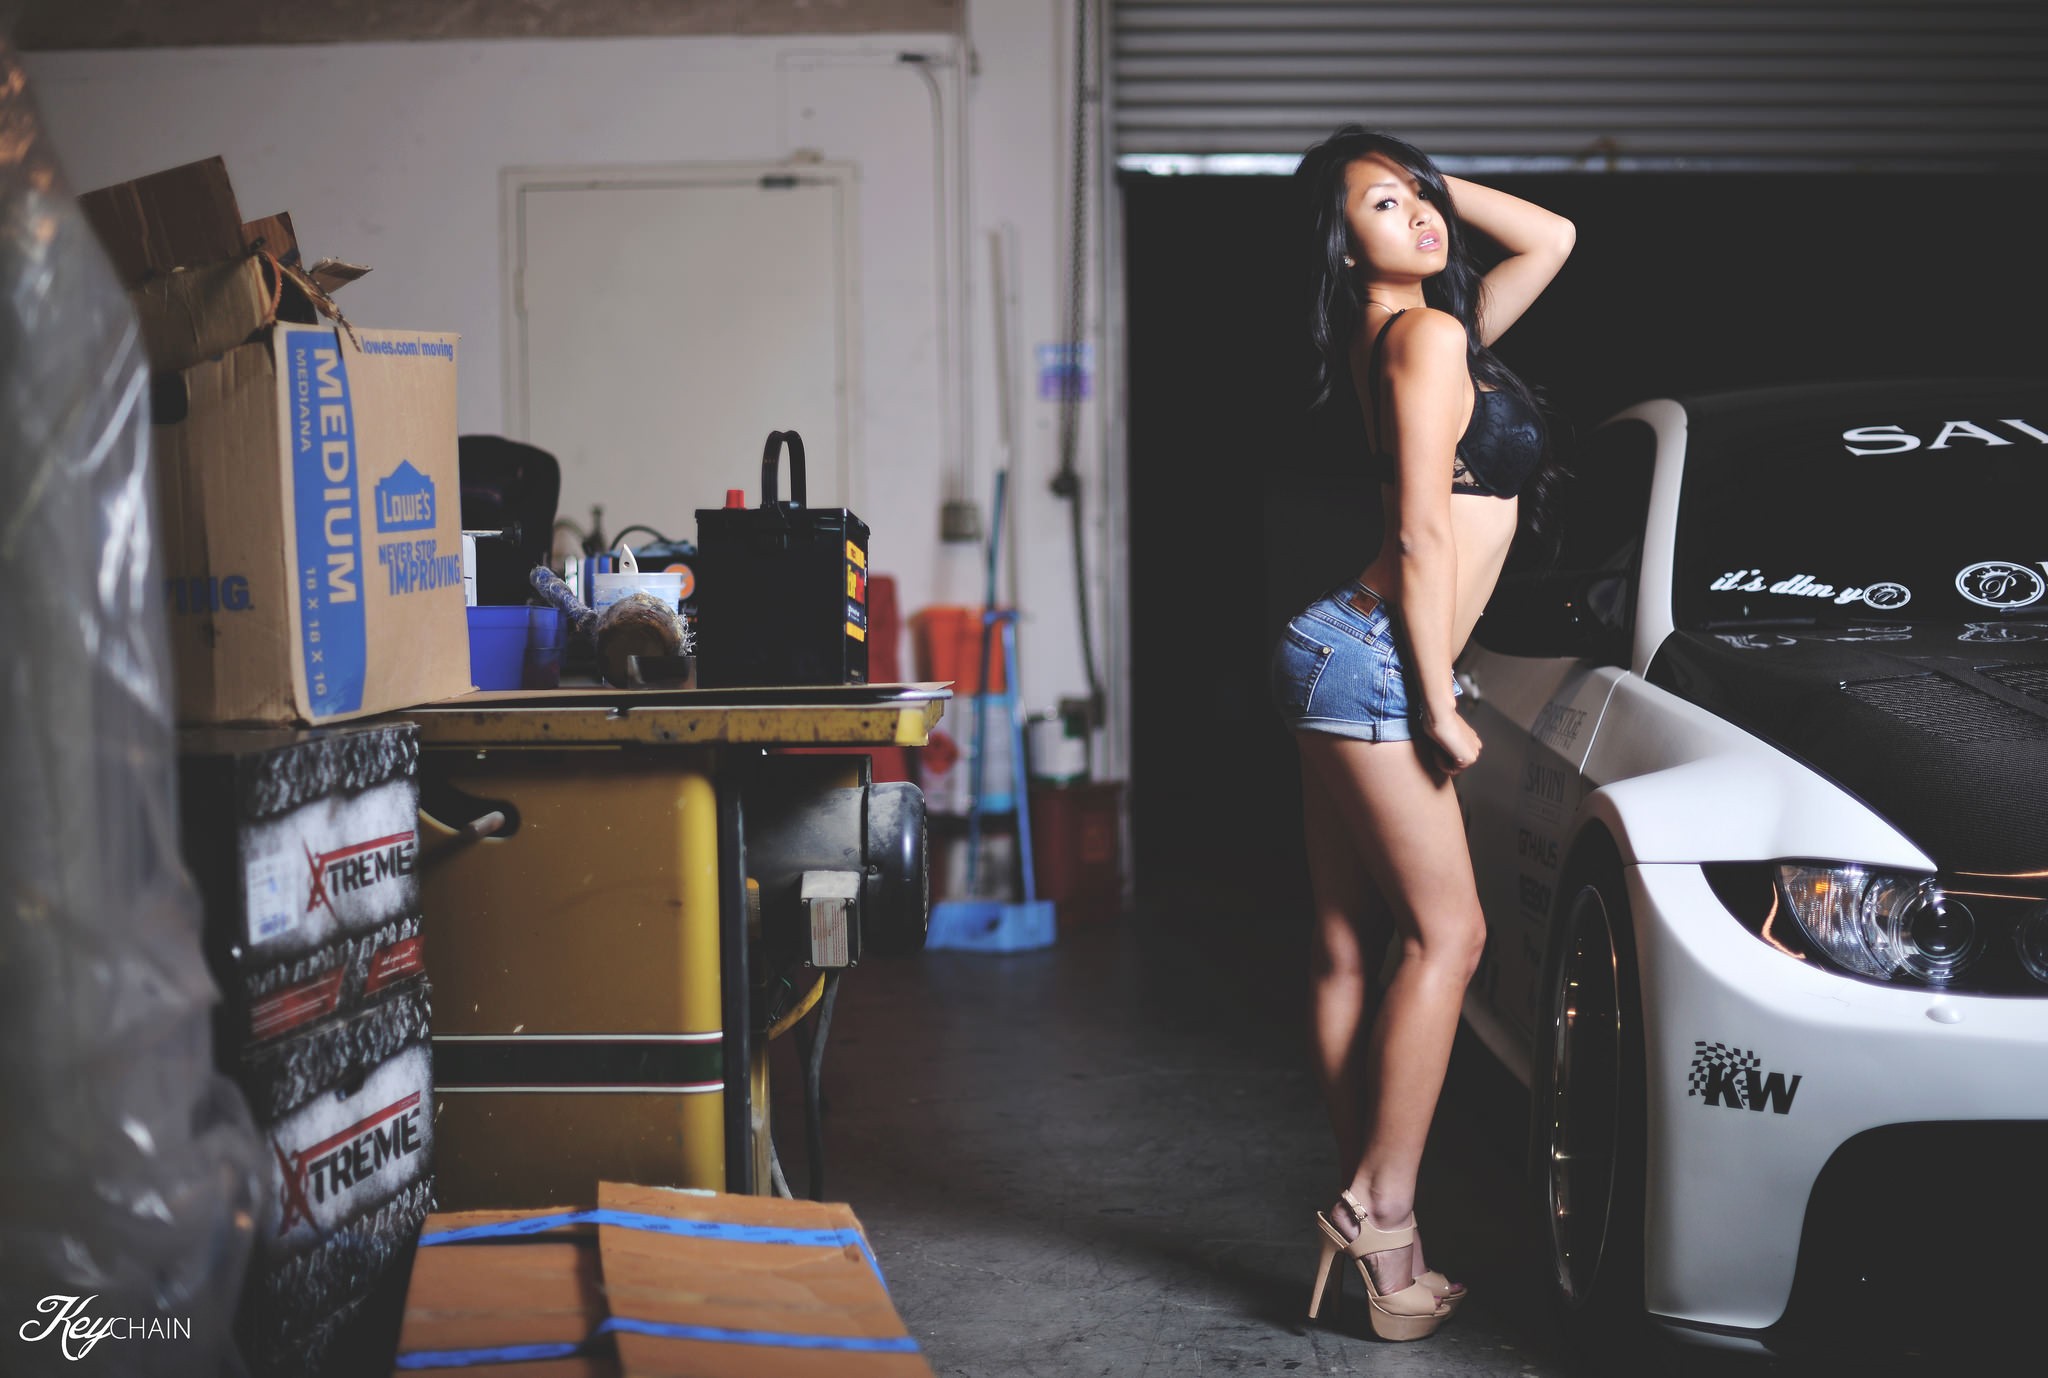 People 2048x1378 women Asian black bras jean shorts high heels car hand(s) in hair BMW ass Christy Truong BMW E92 BMW 3 Series women with cars heels dark hair standing vehicle looking at viewer Key Chain